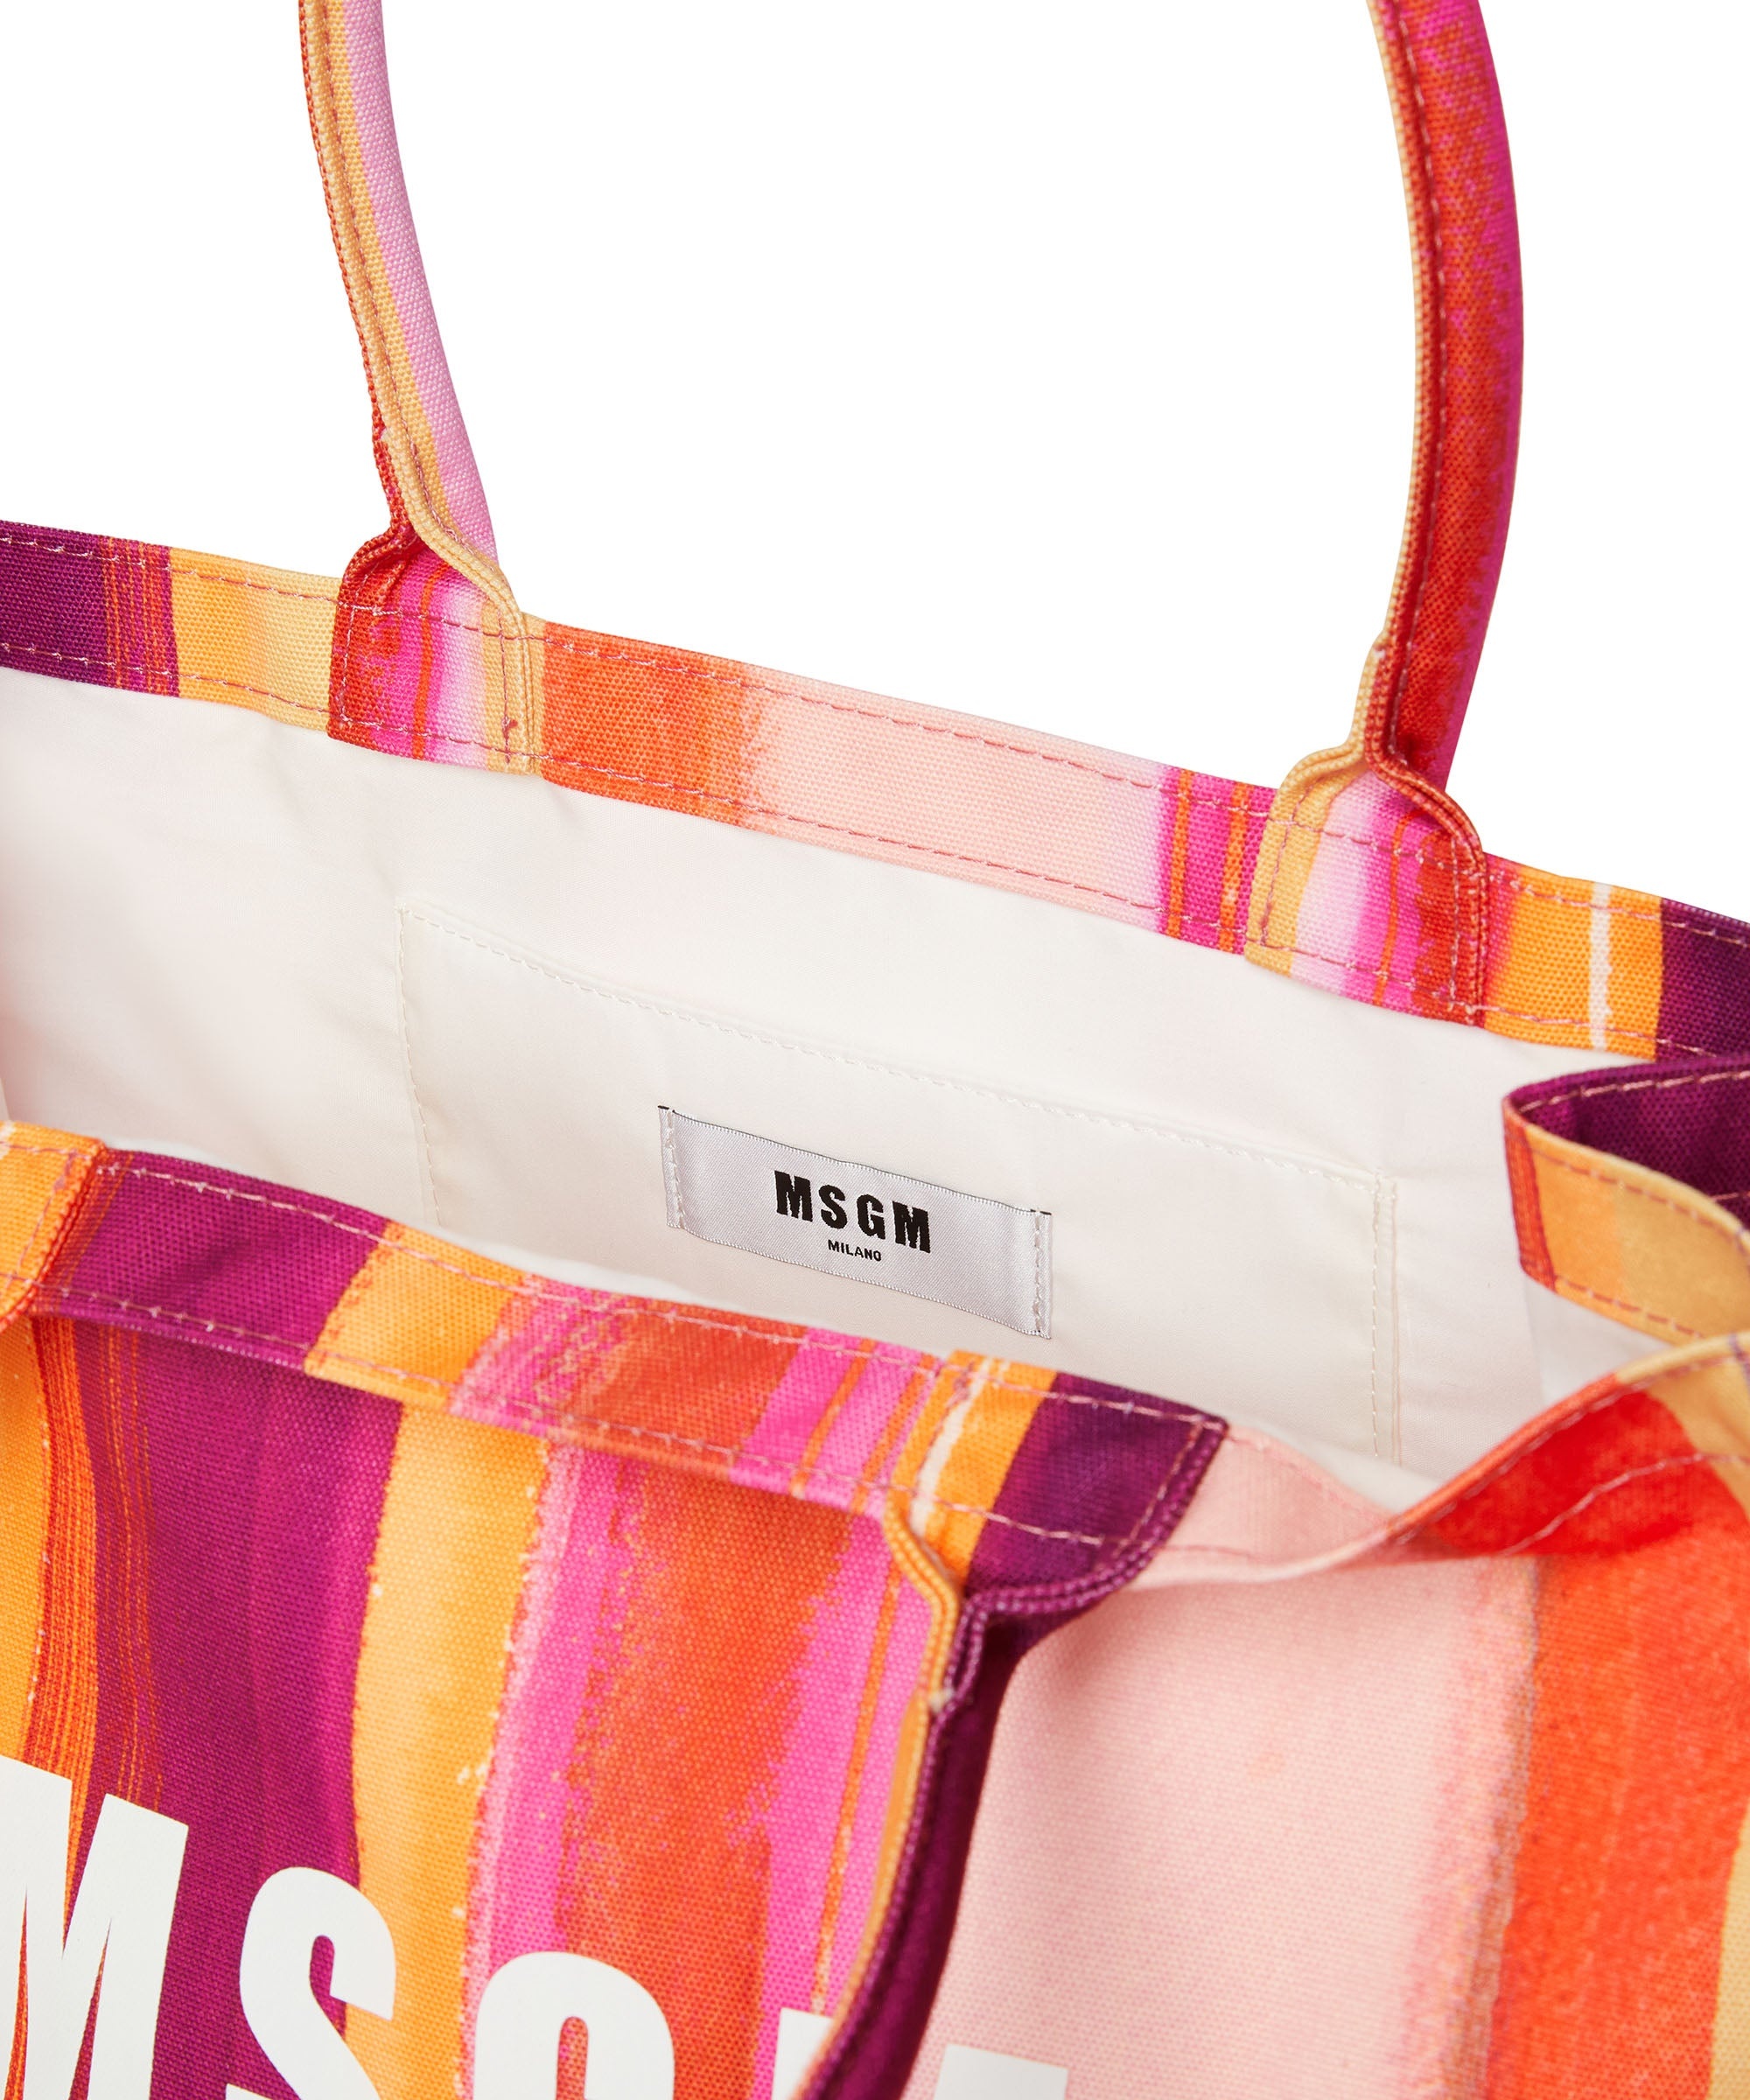 Cotton "brushed stripes" tote bag with MSGM logo - 4